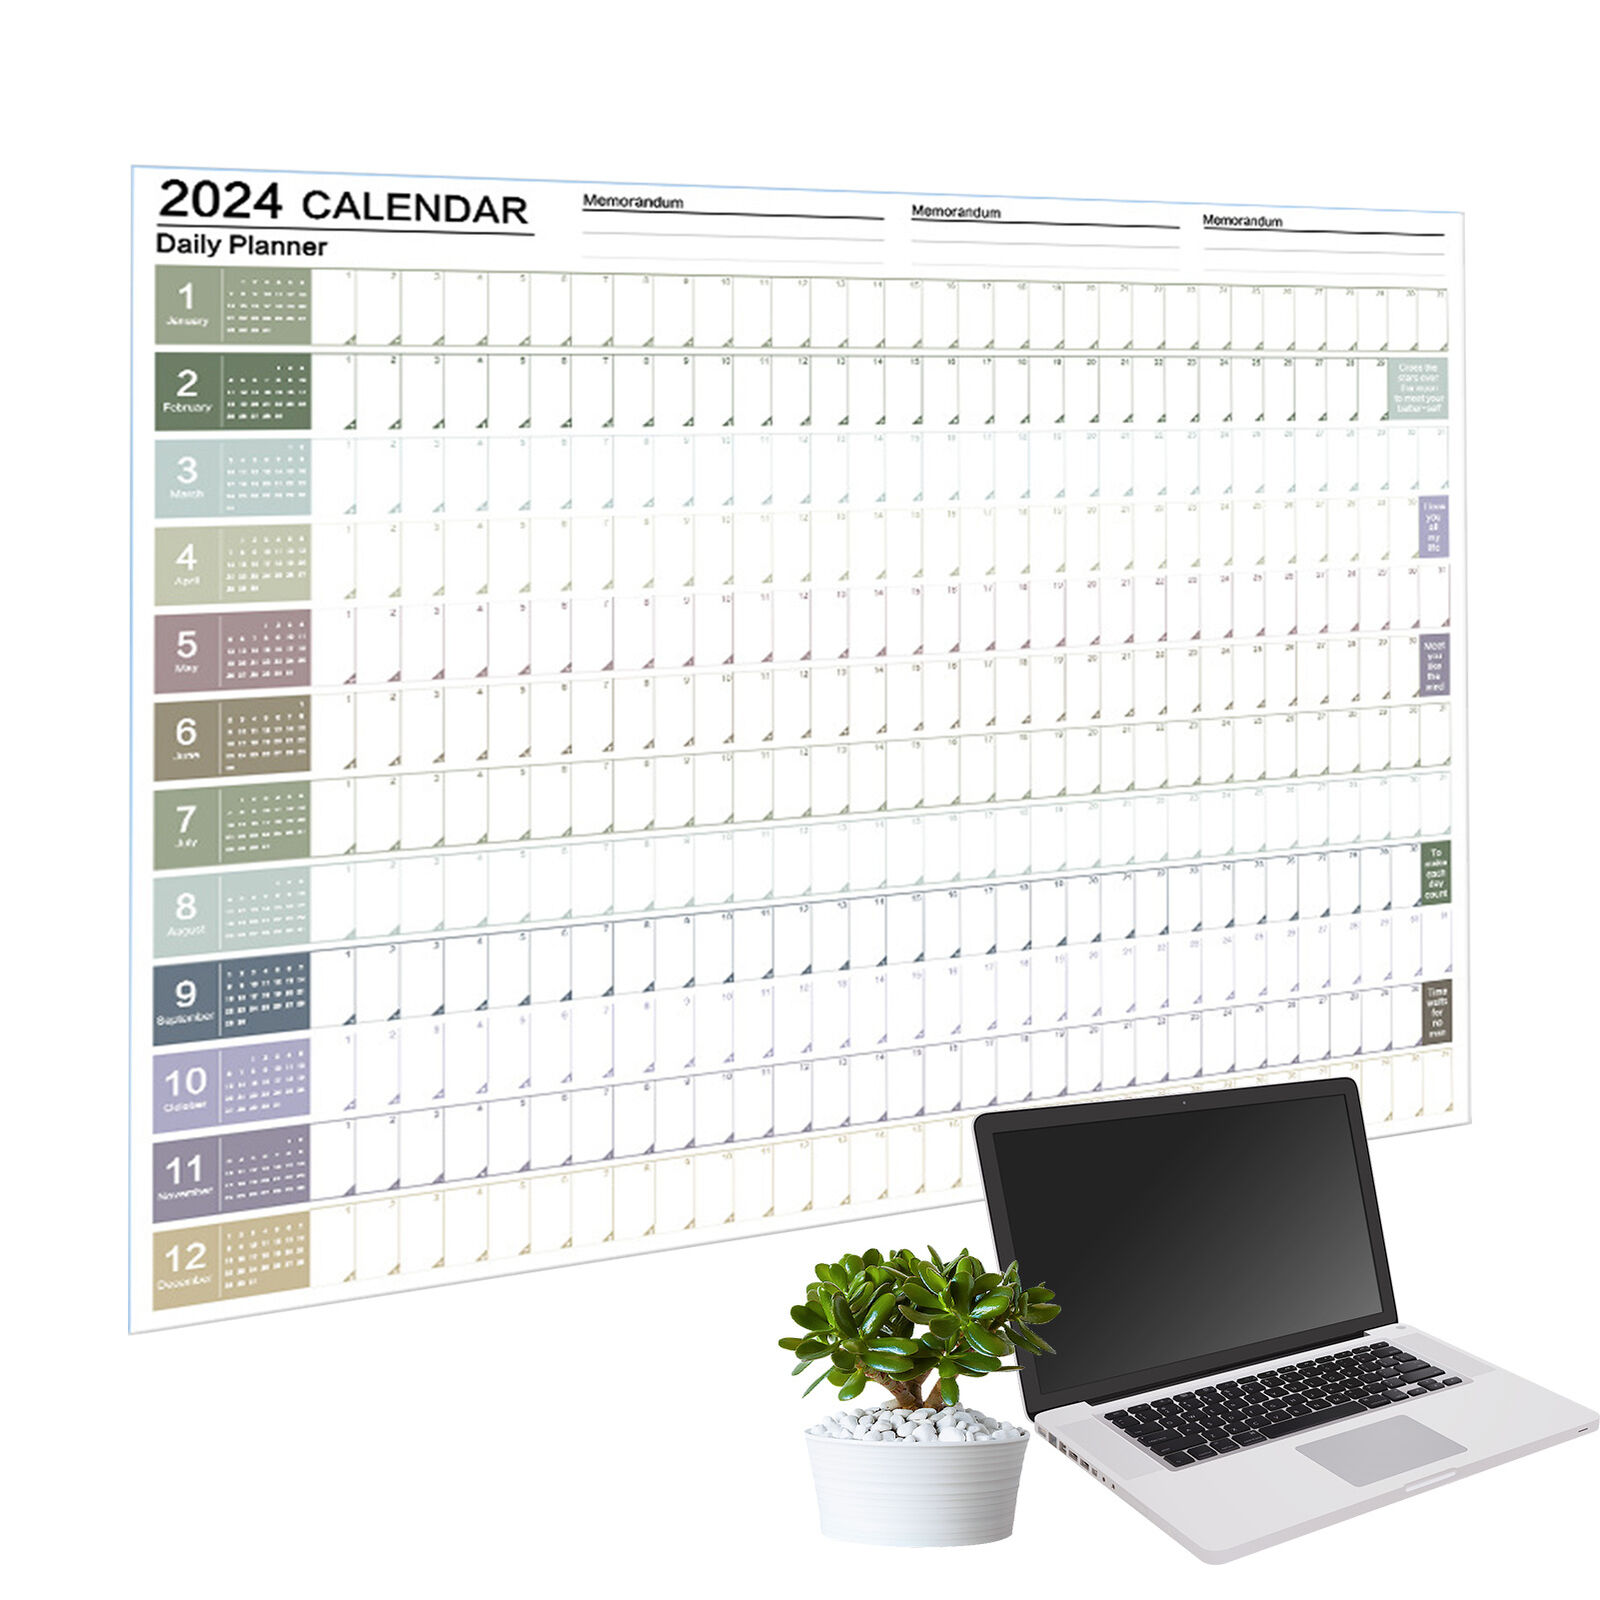 2024 Wall Calendar 12 Monthly Calendar Poster Calendars, Annual Yearly Planner 